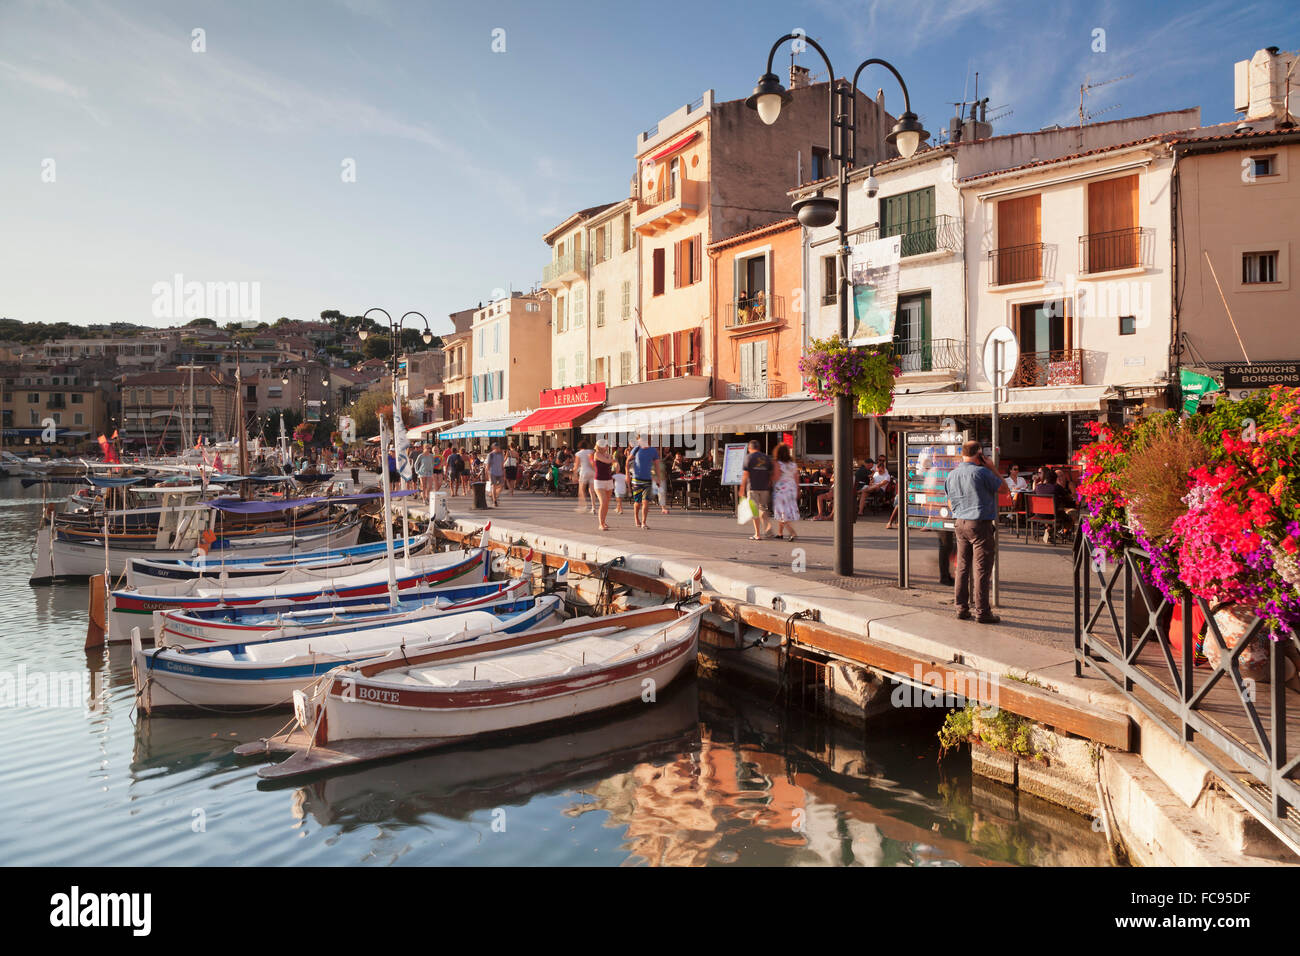 Fishing boats at the harbour, Cassis, Provence, Provence-Alpes-Cote d'Azur, France Stock Photo